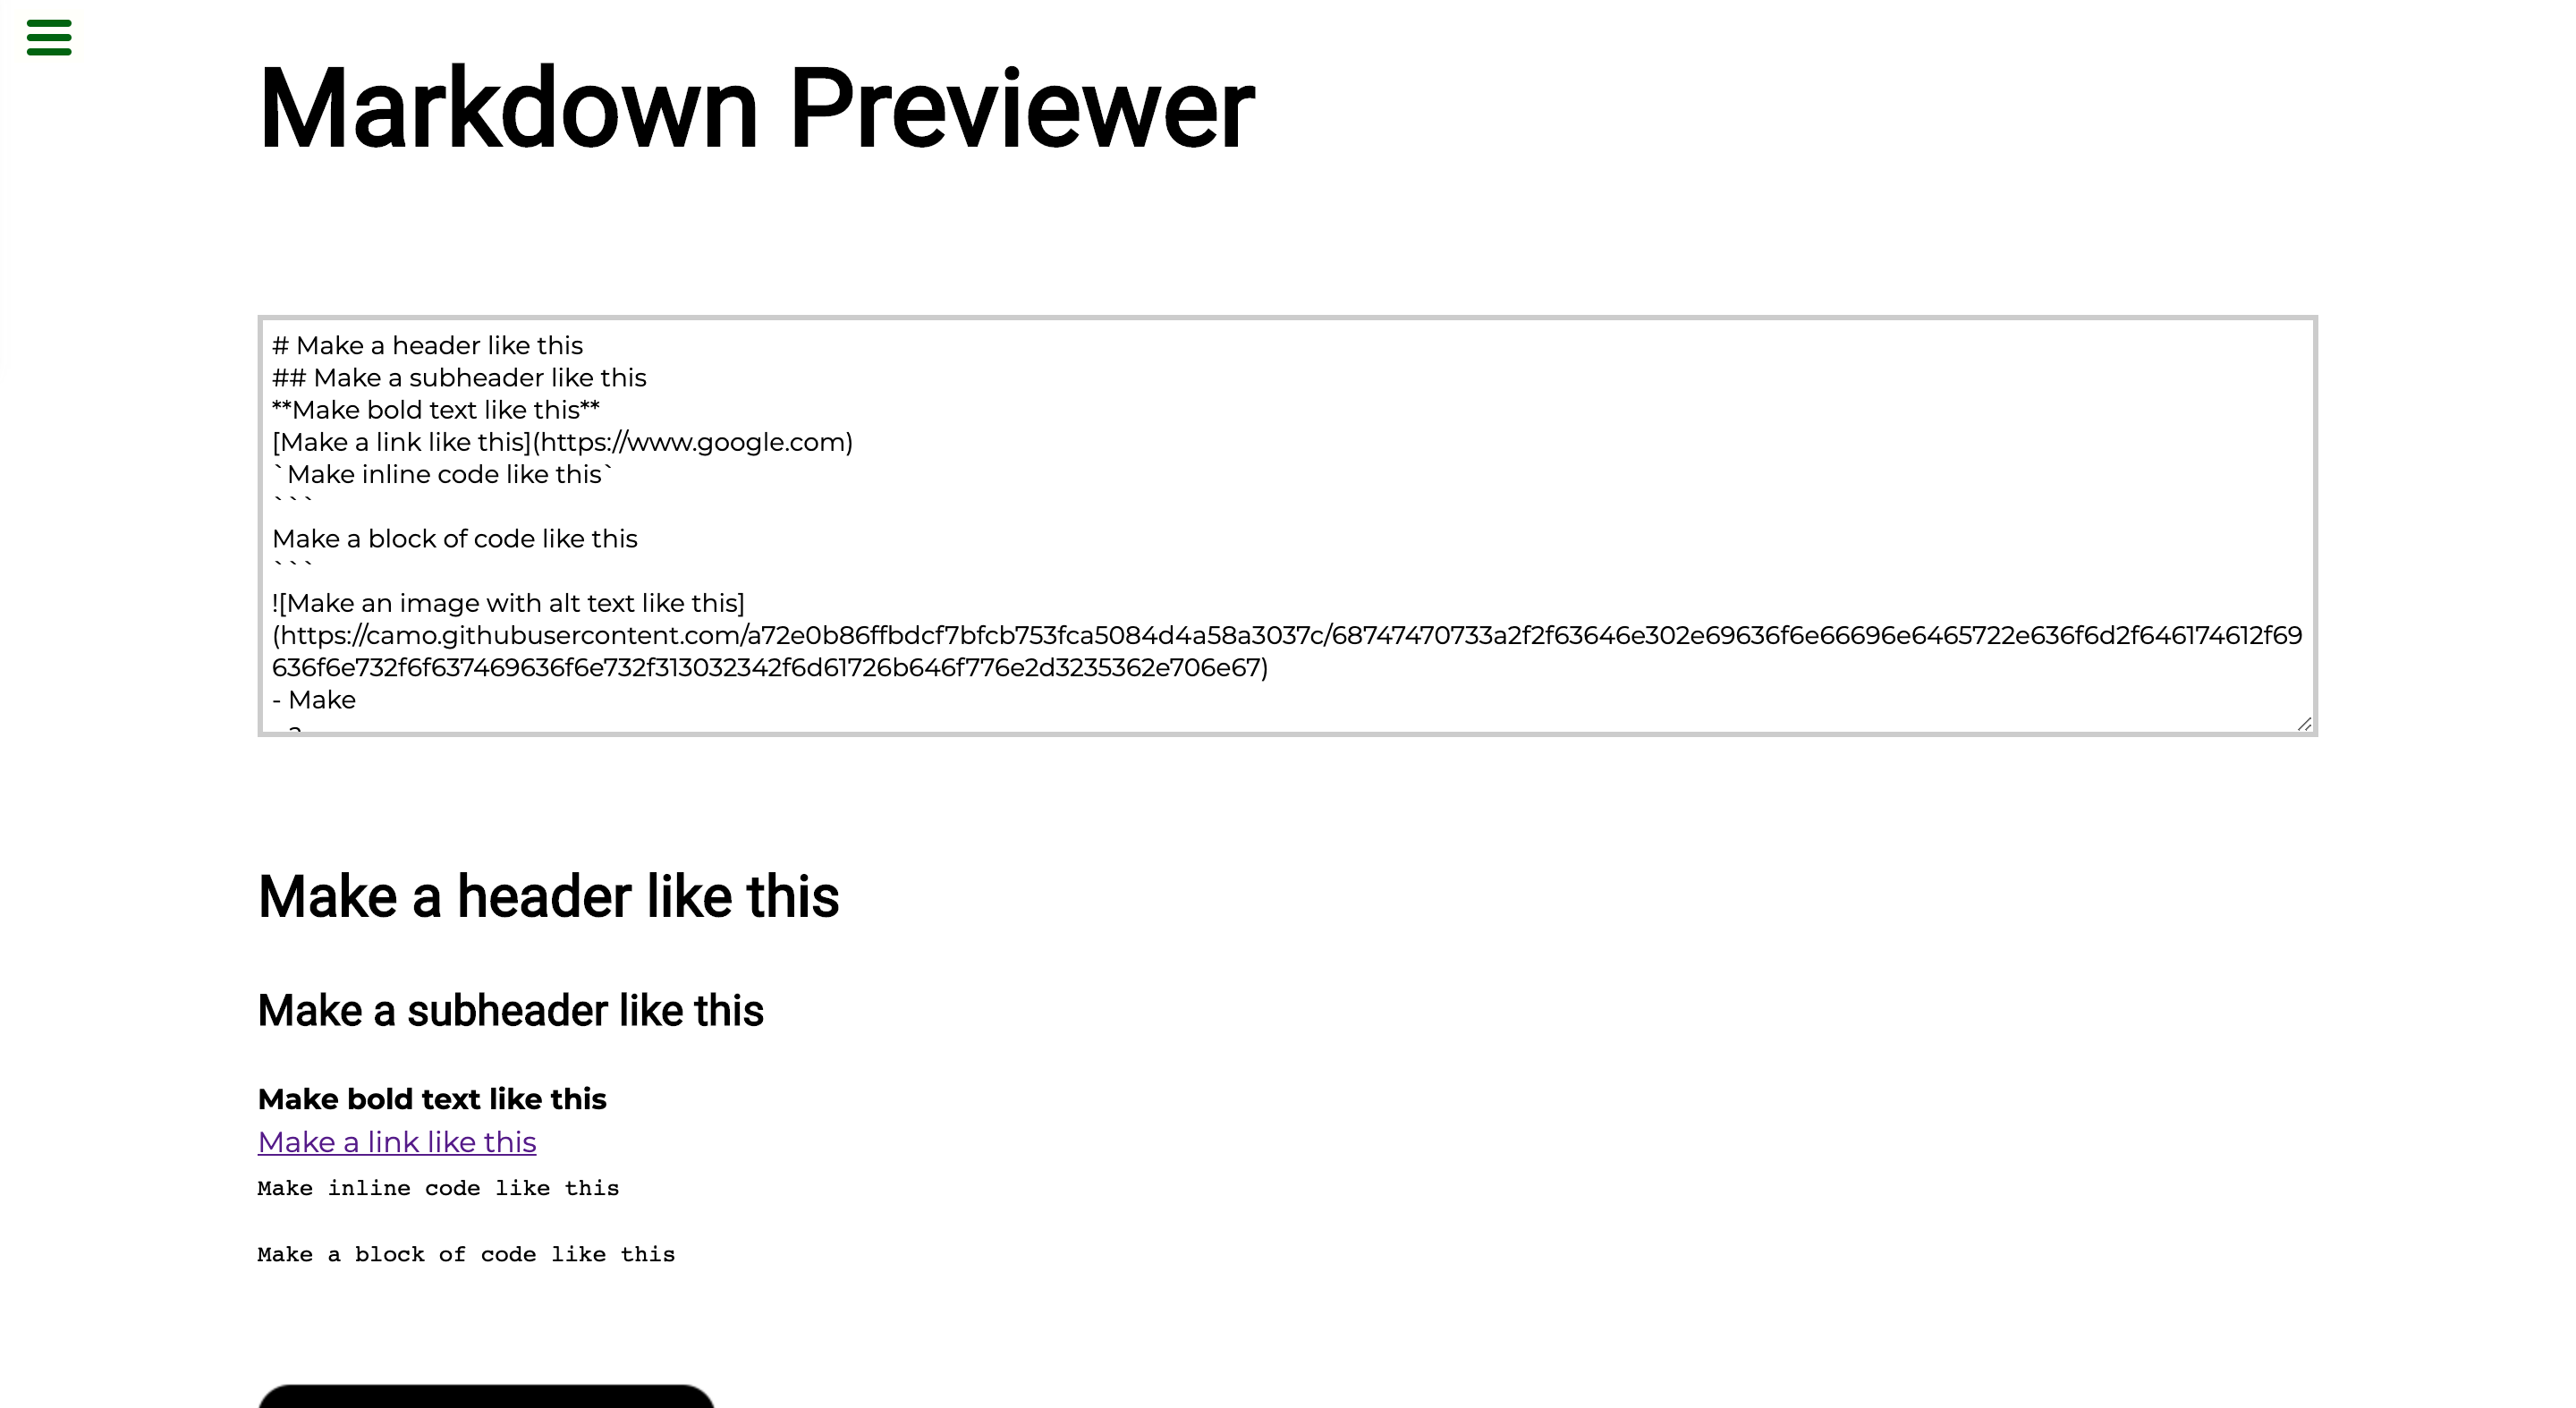 Markdown previewer web page